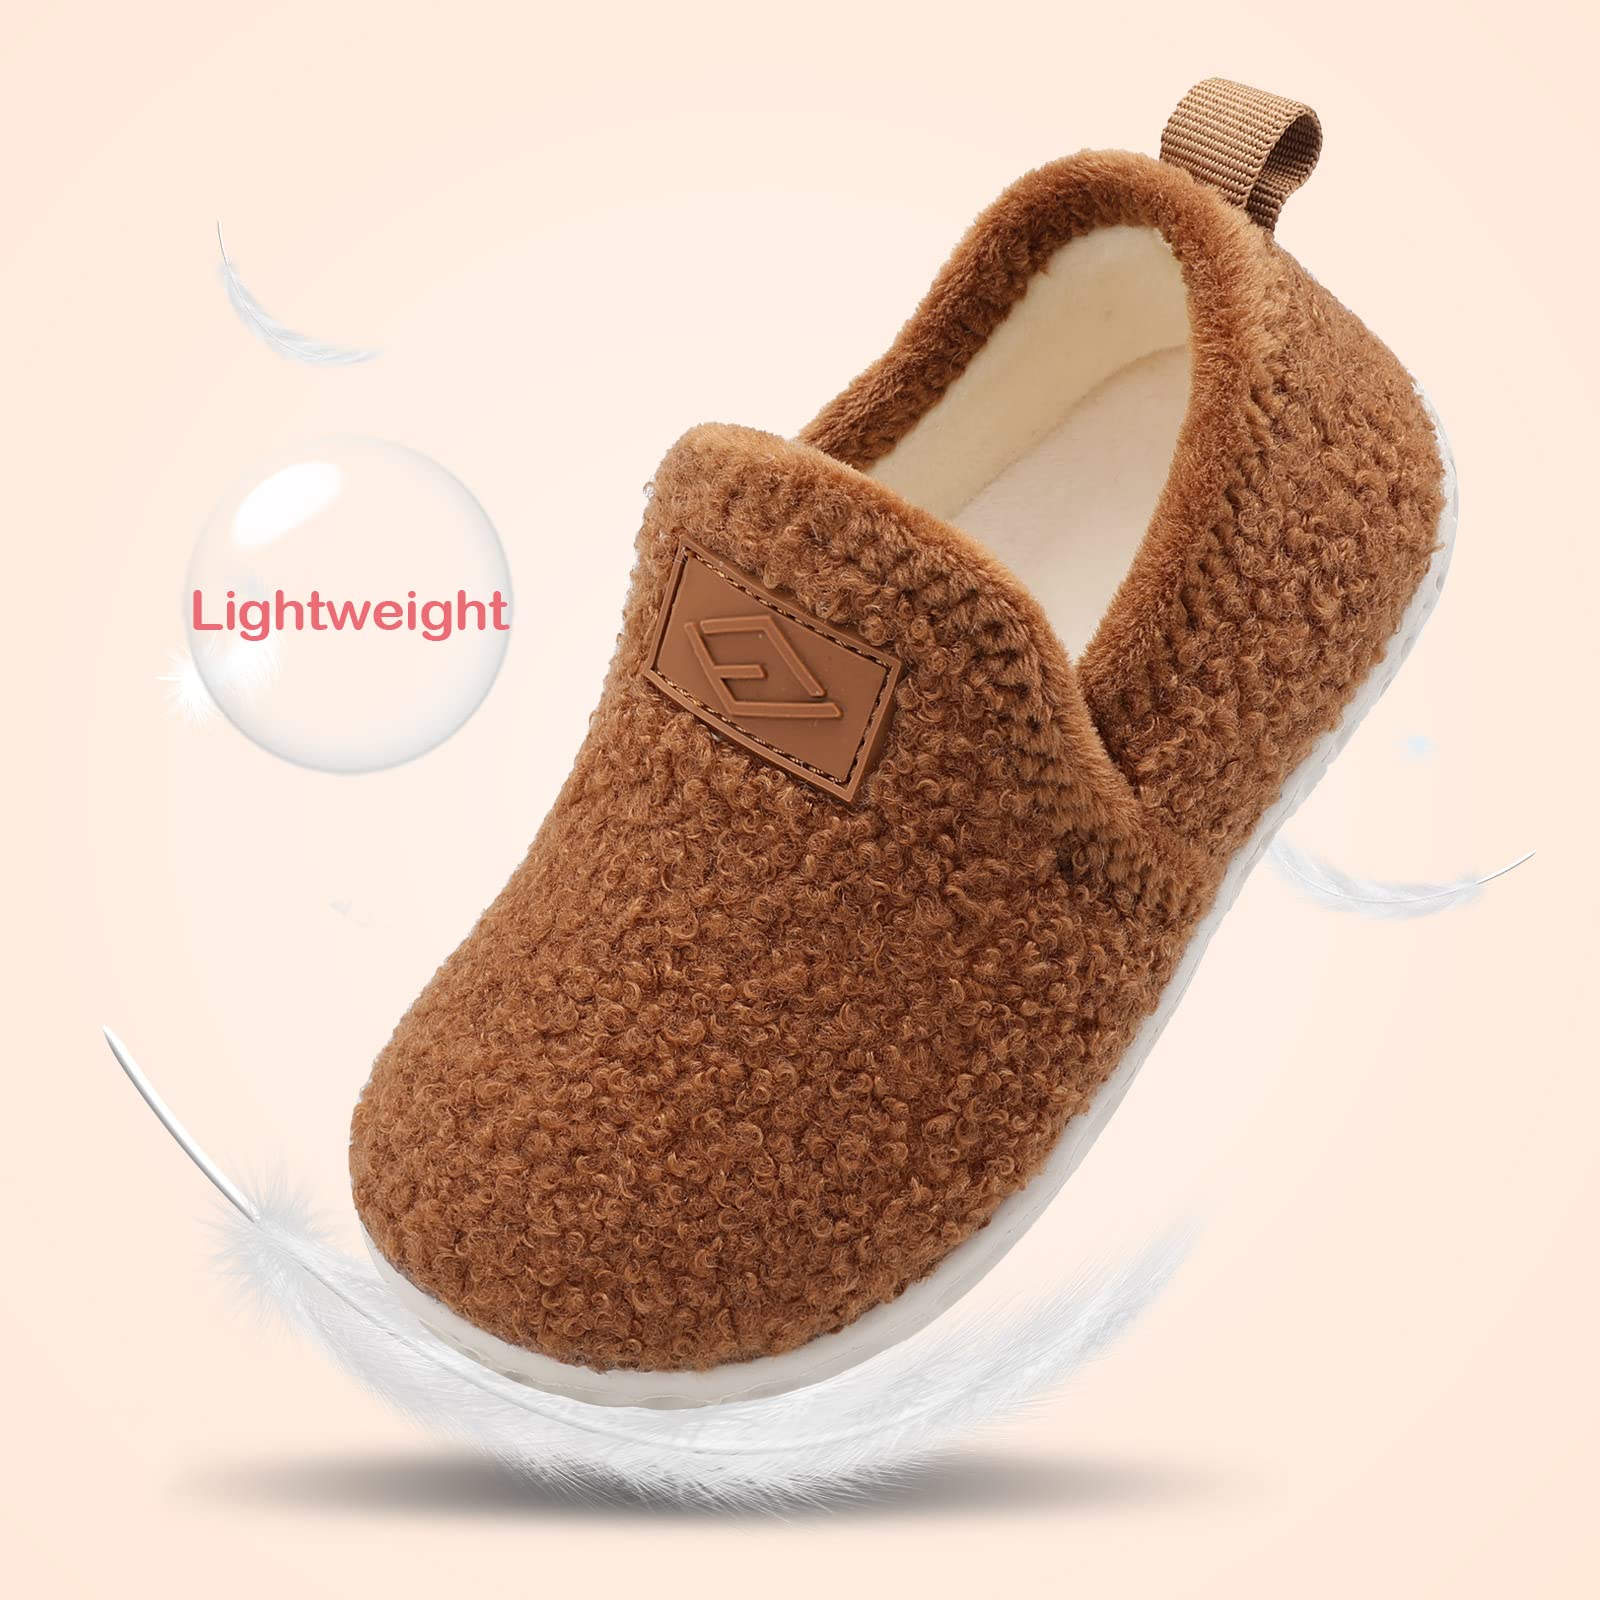 Lefflow Toddler Slippers Boys Girls House Shoes Water Swim Beach Shoes Lightweight Outdoor Walking Shoes